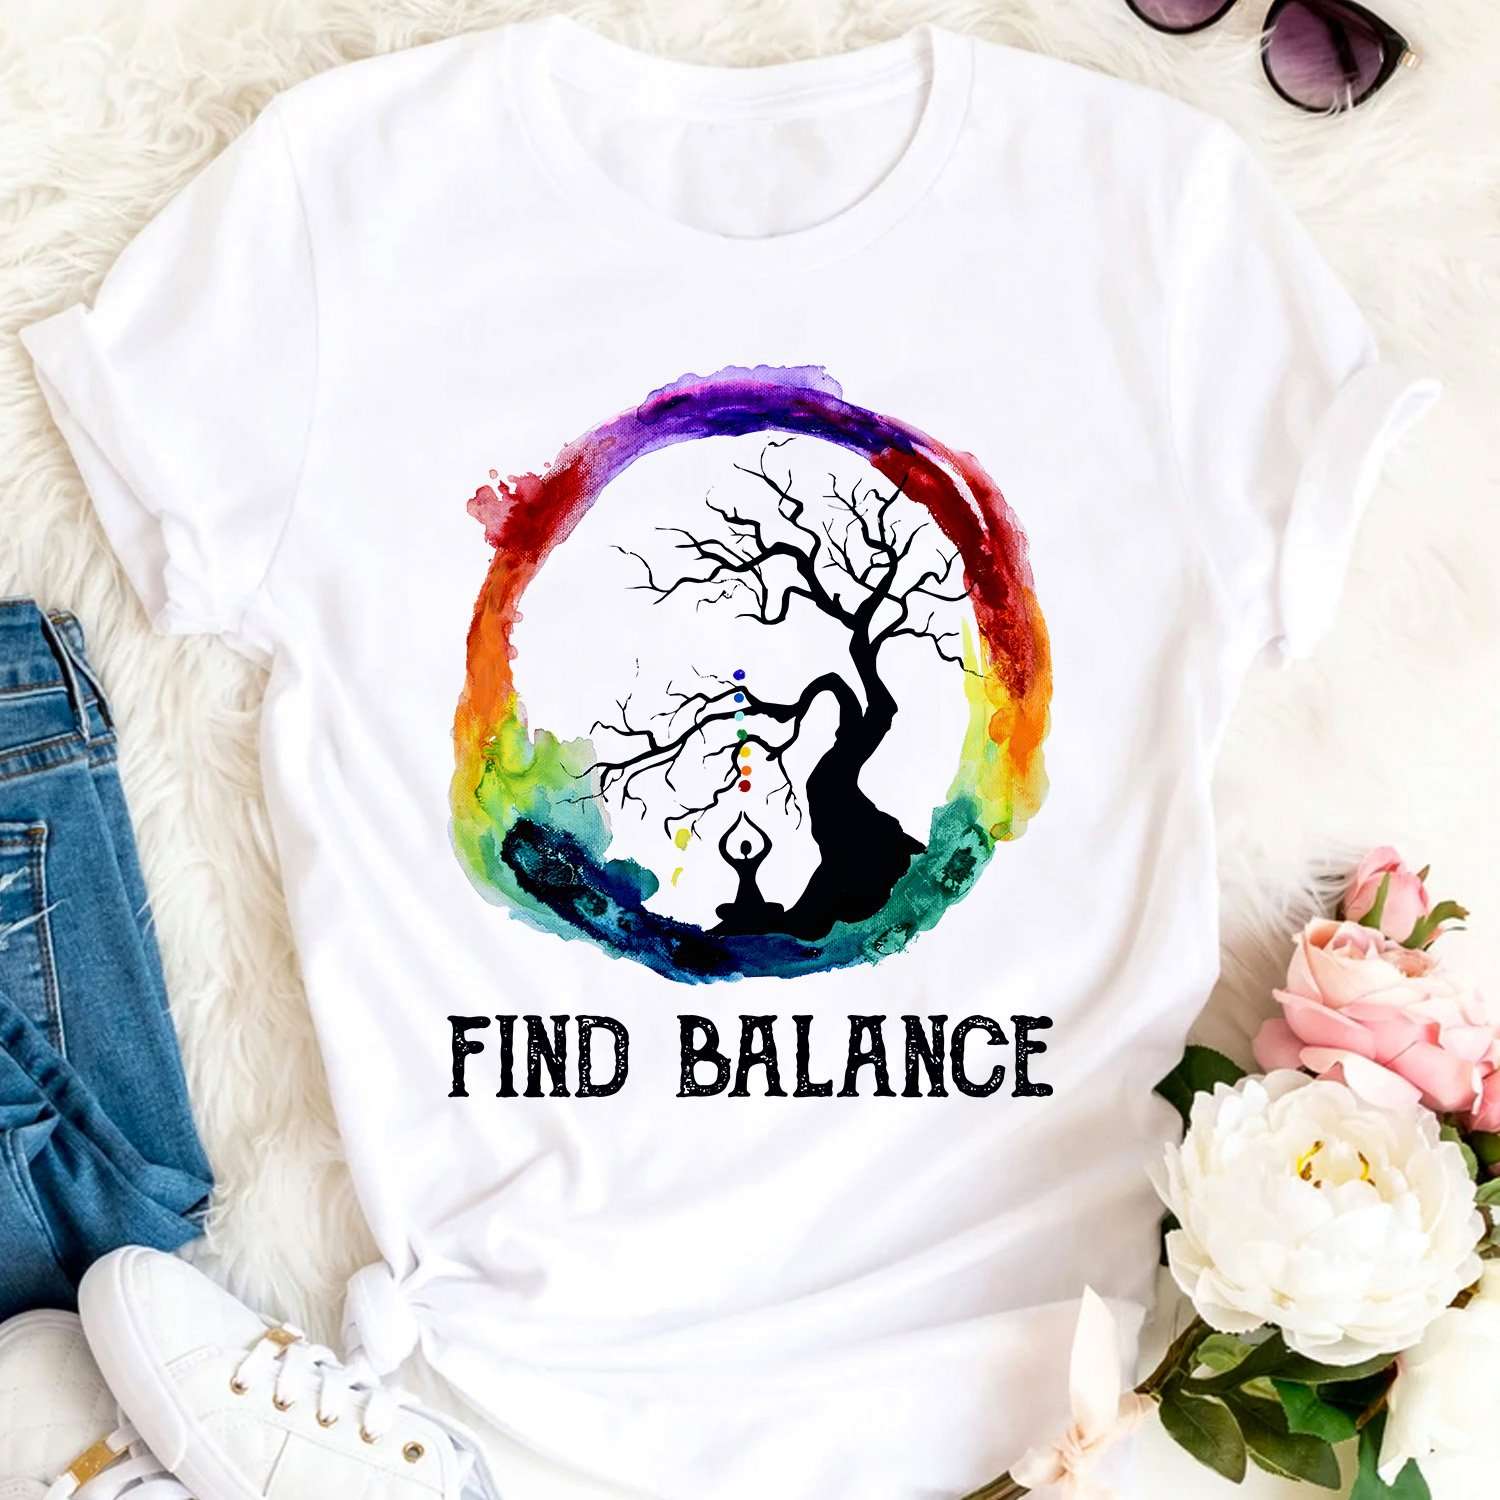 Find balance - Doing yoga people, finding inner peace